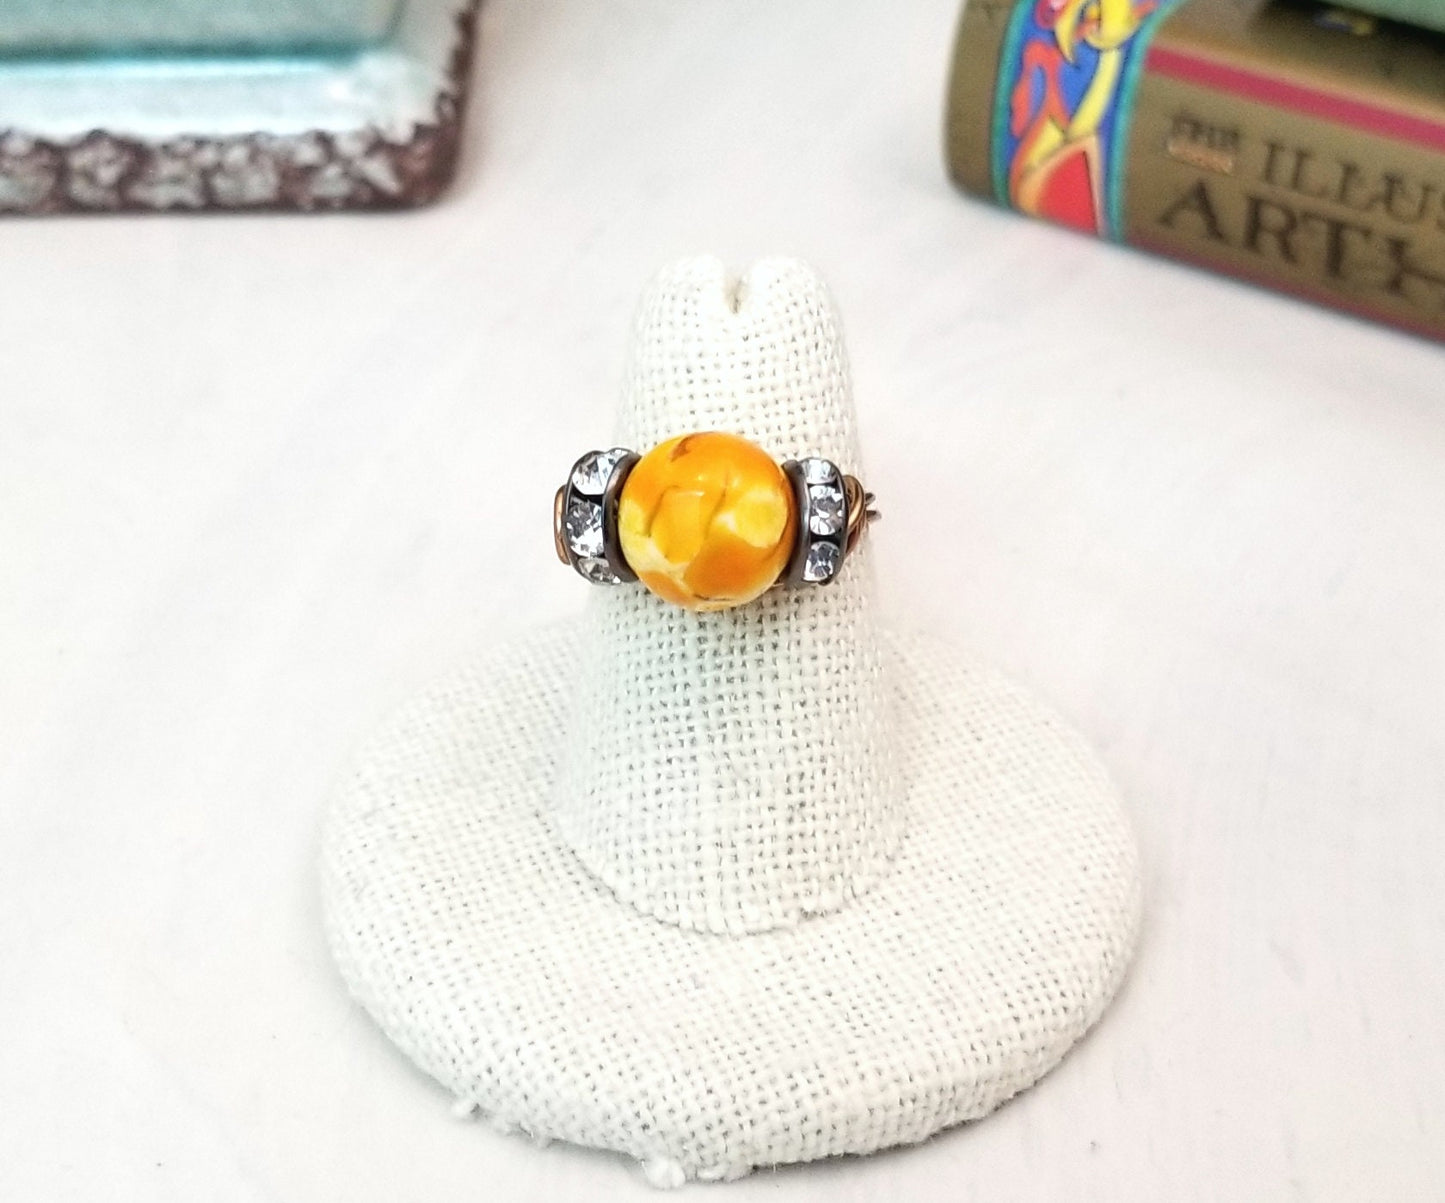 Wire Ring in Yellow Agate with Rhinestones, Fairy Tale, Renaissance, Medieval, Choice of Colors and Metals